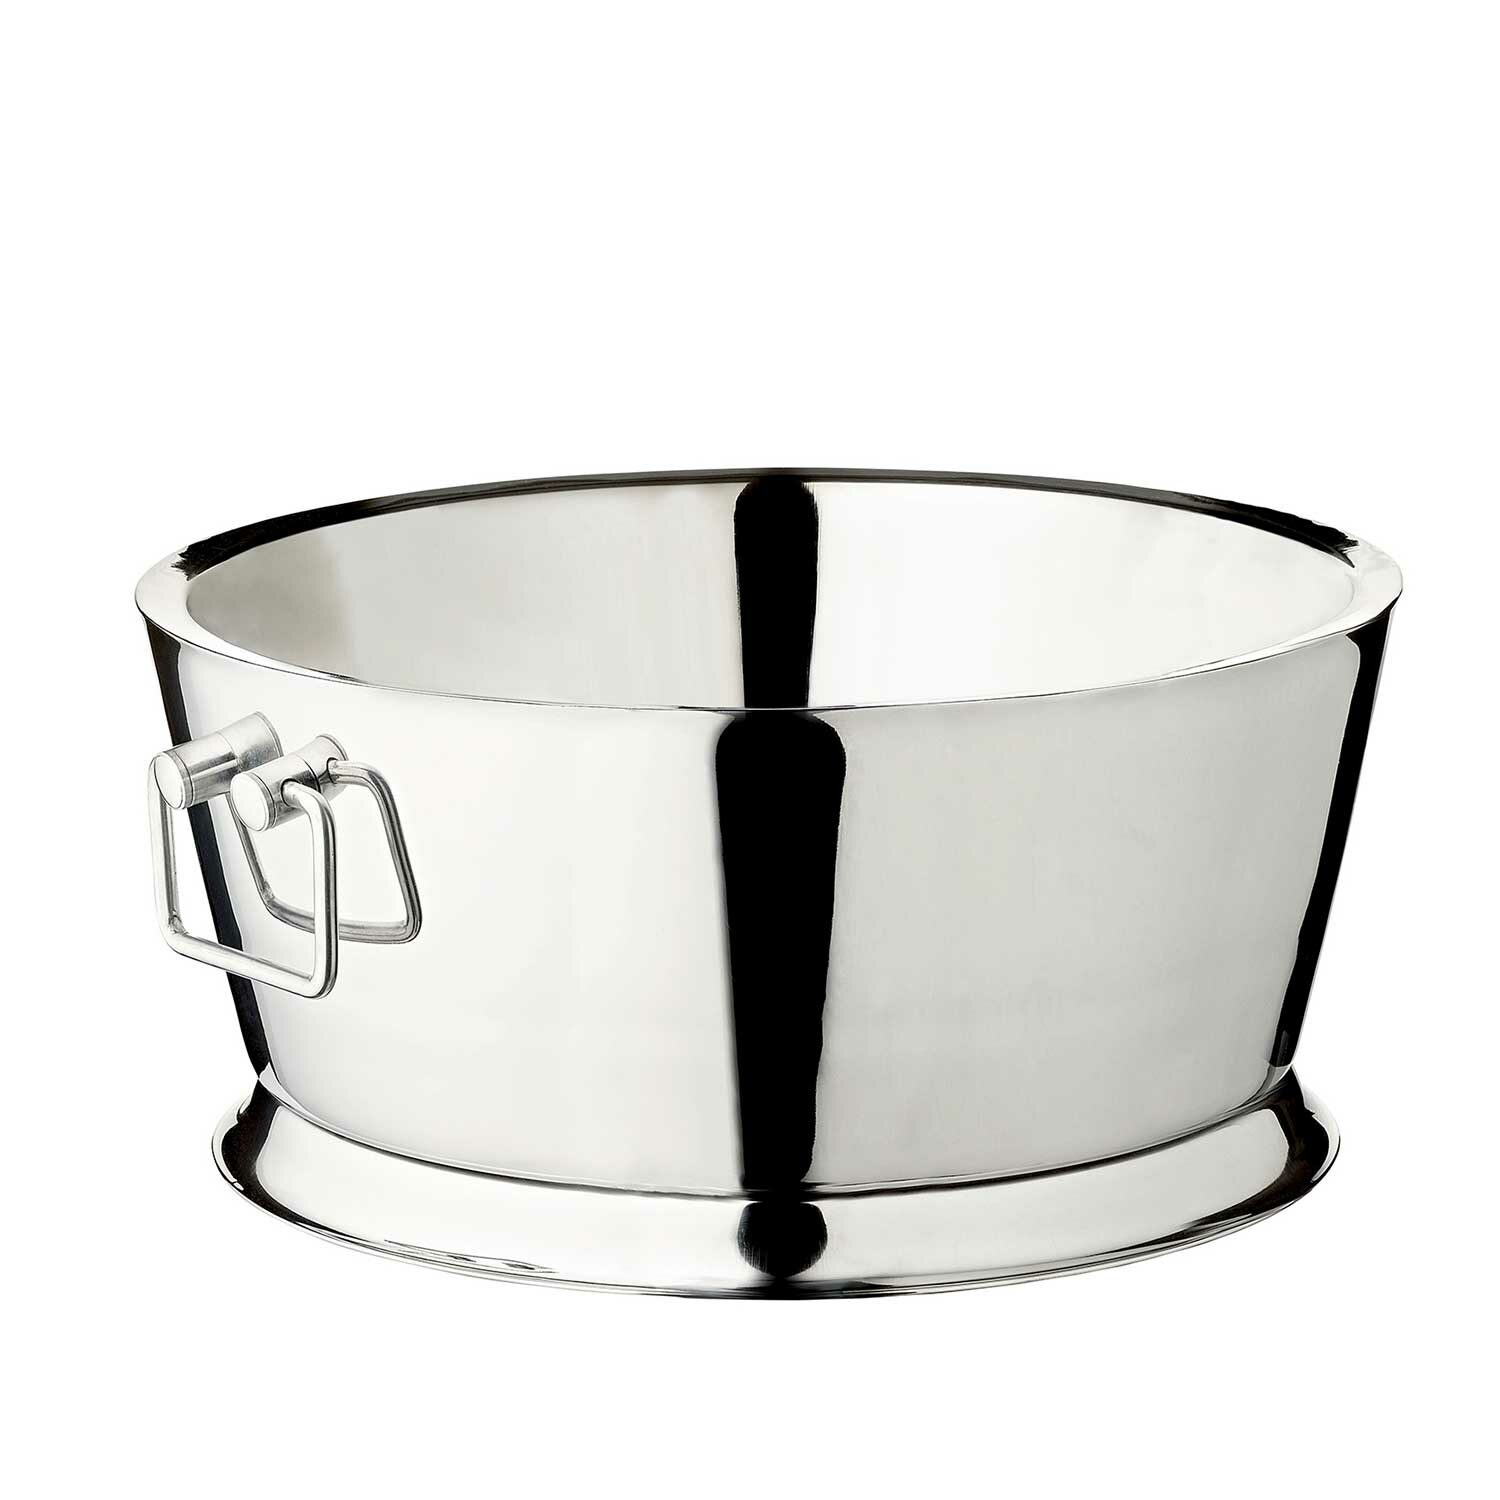 MICHIGAN champagne cooler stainless steel